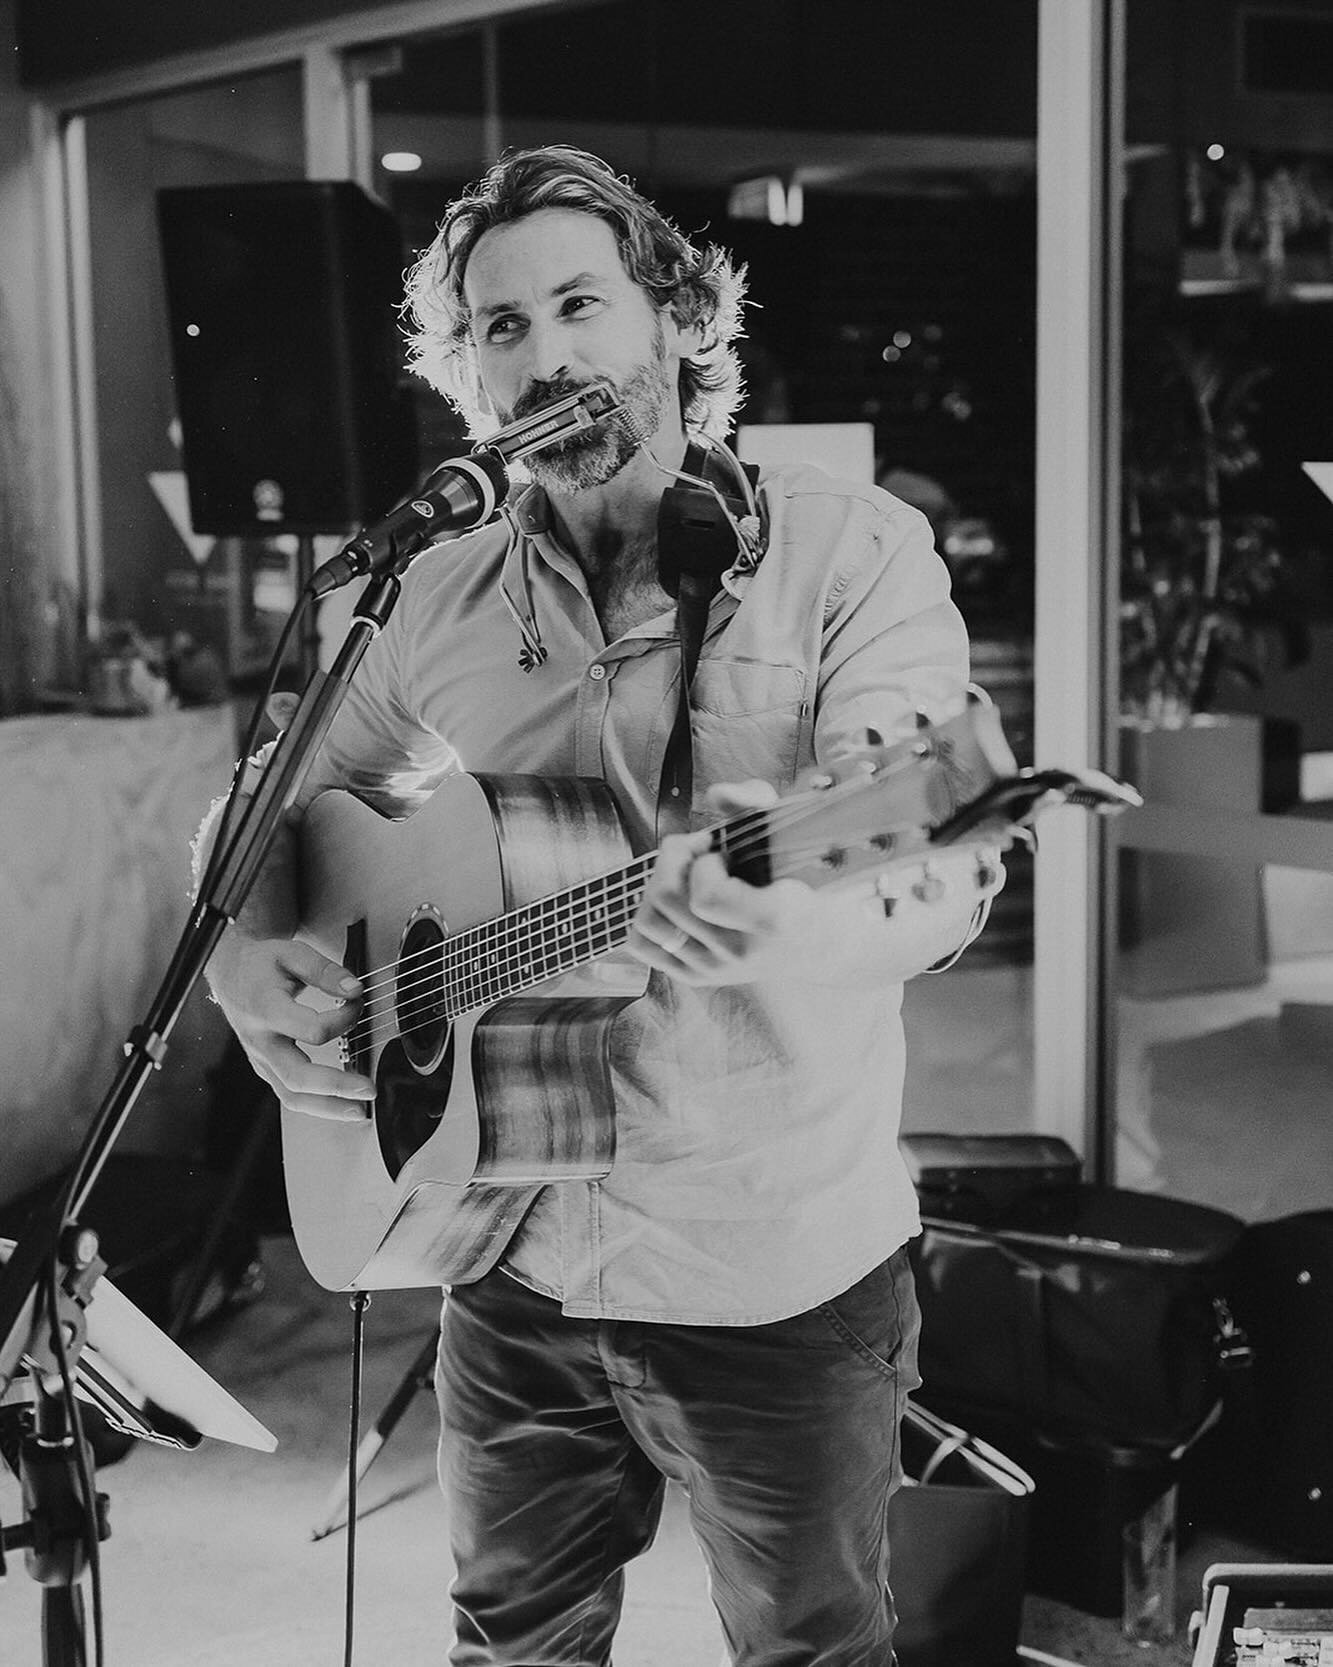 Happy Sunday! We have @chrisrutherfordmusic starting from 3pm. Come down grab some tacos and enjoy this beautiful weather.